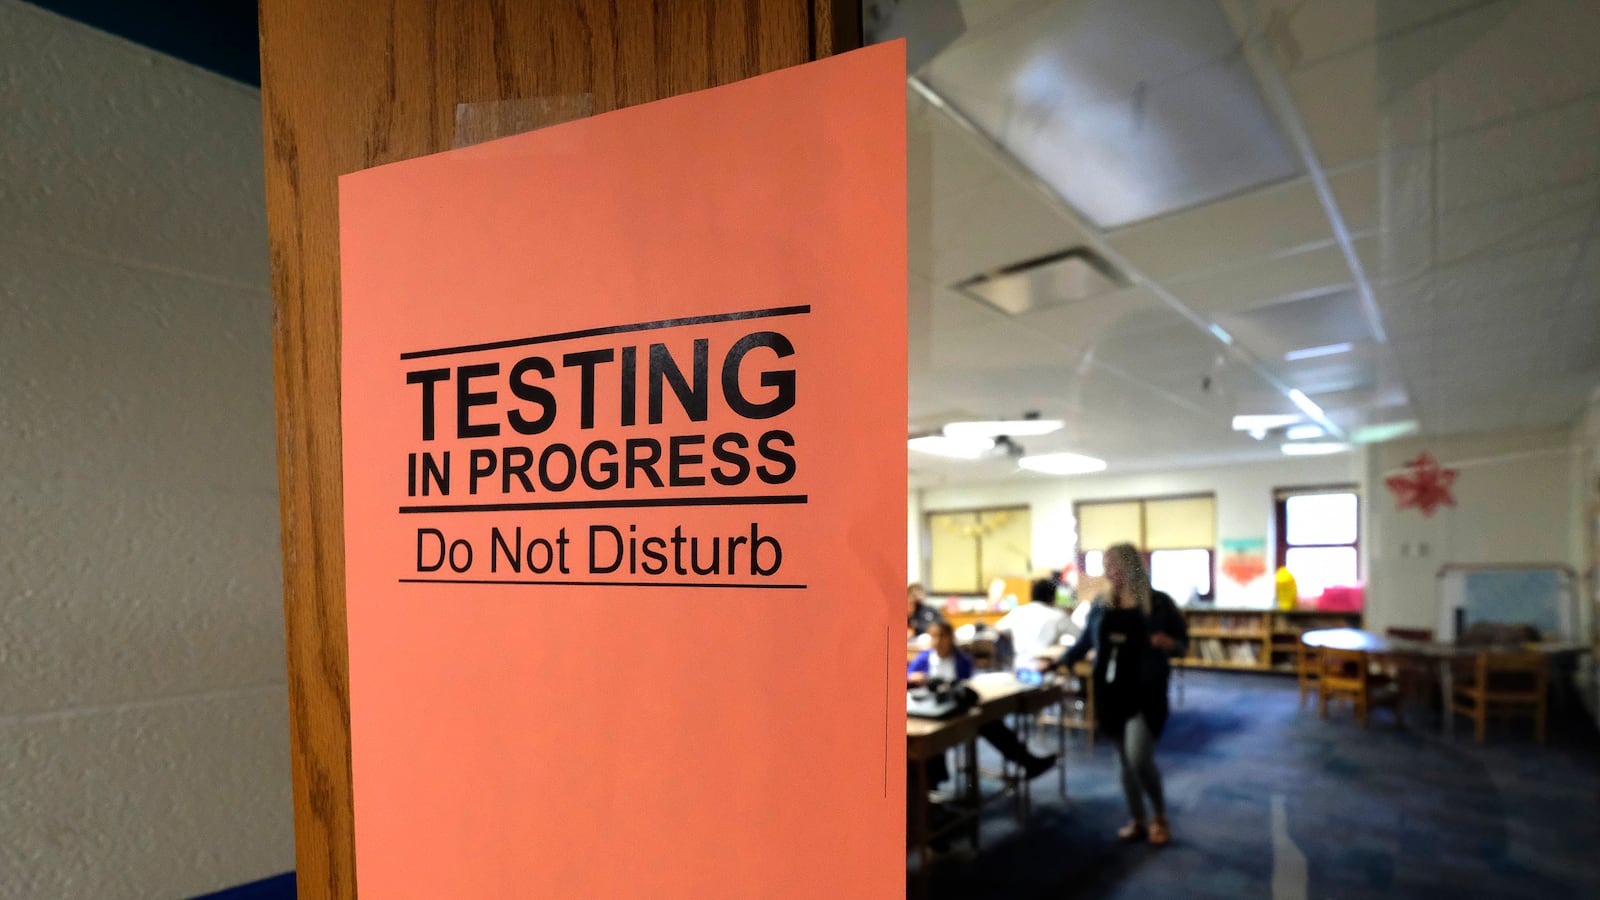 An orange sign says “testing in progress, do not disturb” as students work in the background.